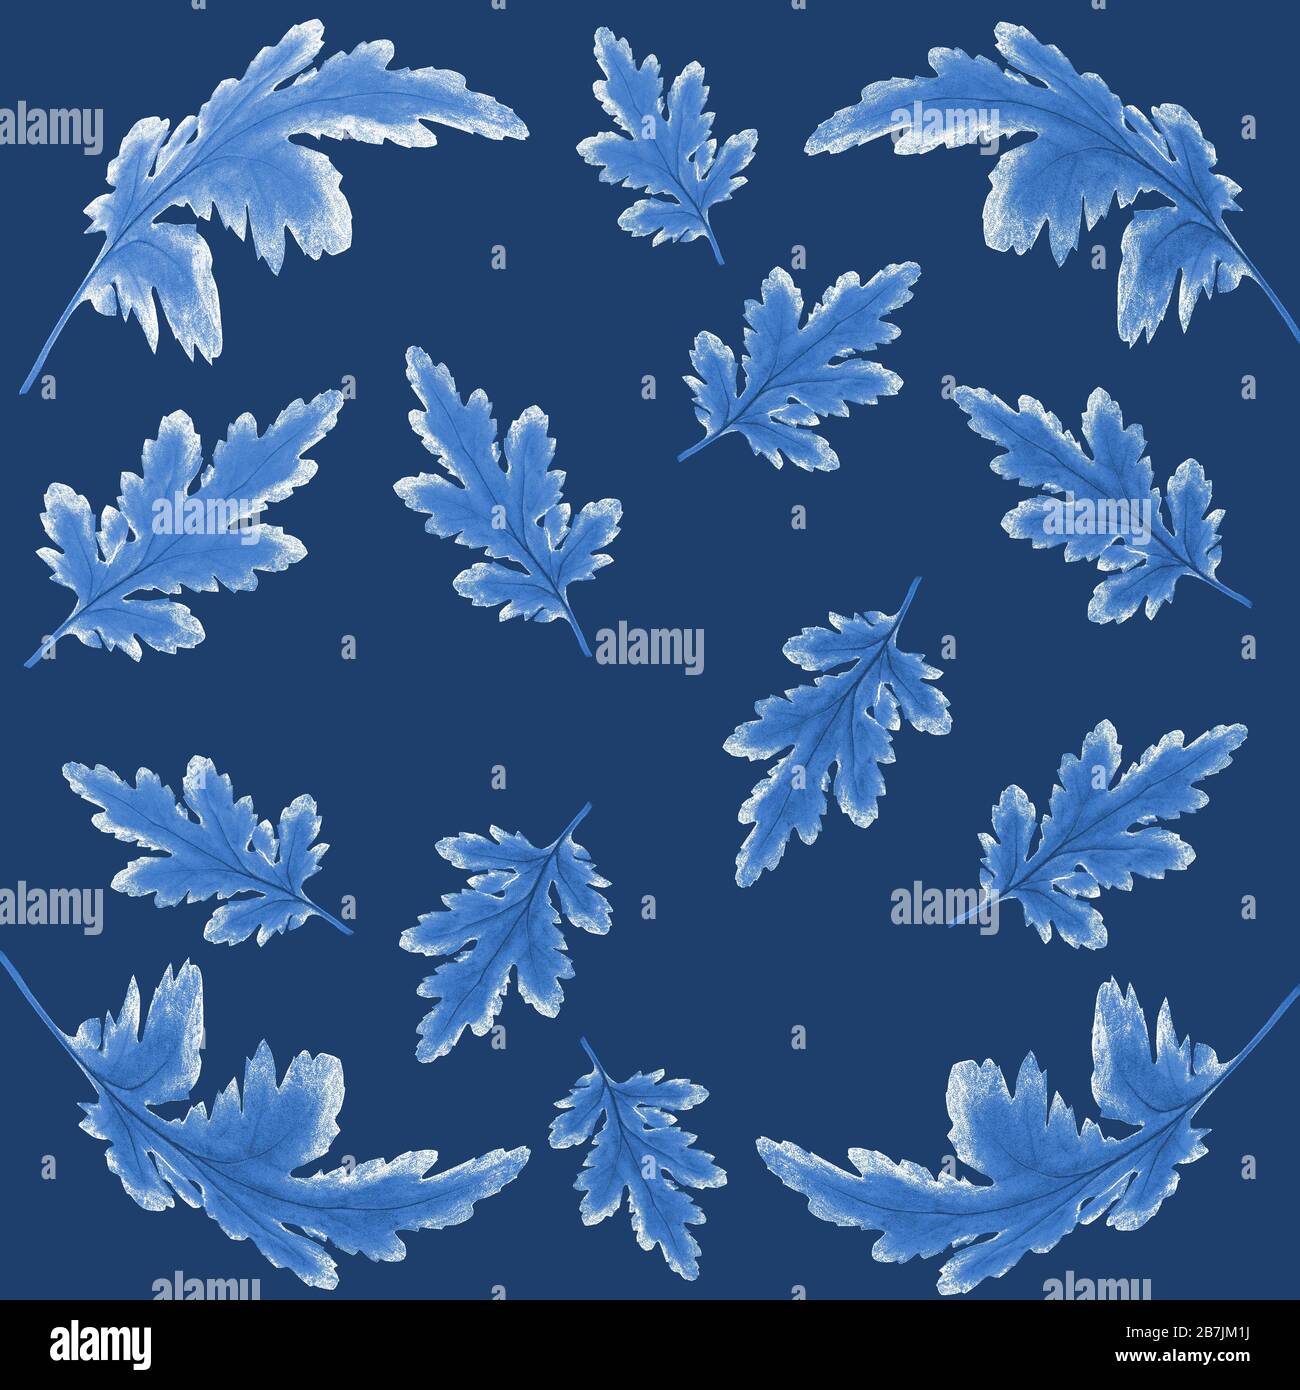 Floral botanical pattern with blue chrysanthemum leaves on dark blue background. Botanical design for textile, napkins, kerchief, shawl in oriental st Stock Photo